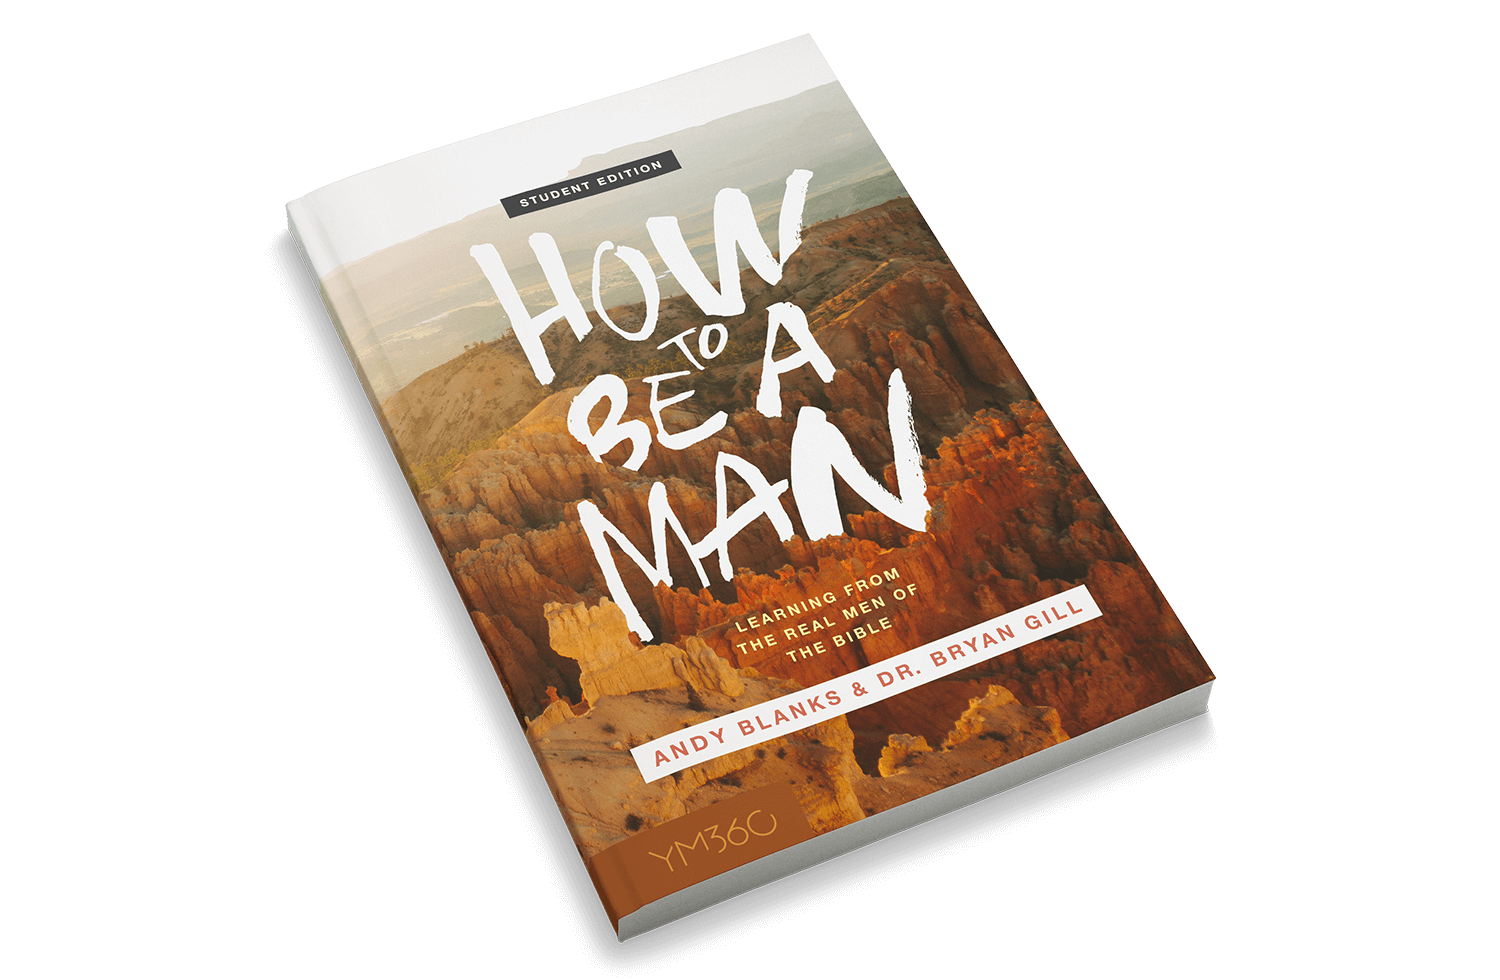 How to Be a Man: Learning From The Real Men Of The Bible [Student Edition]